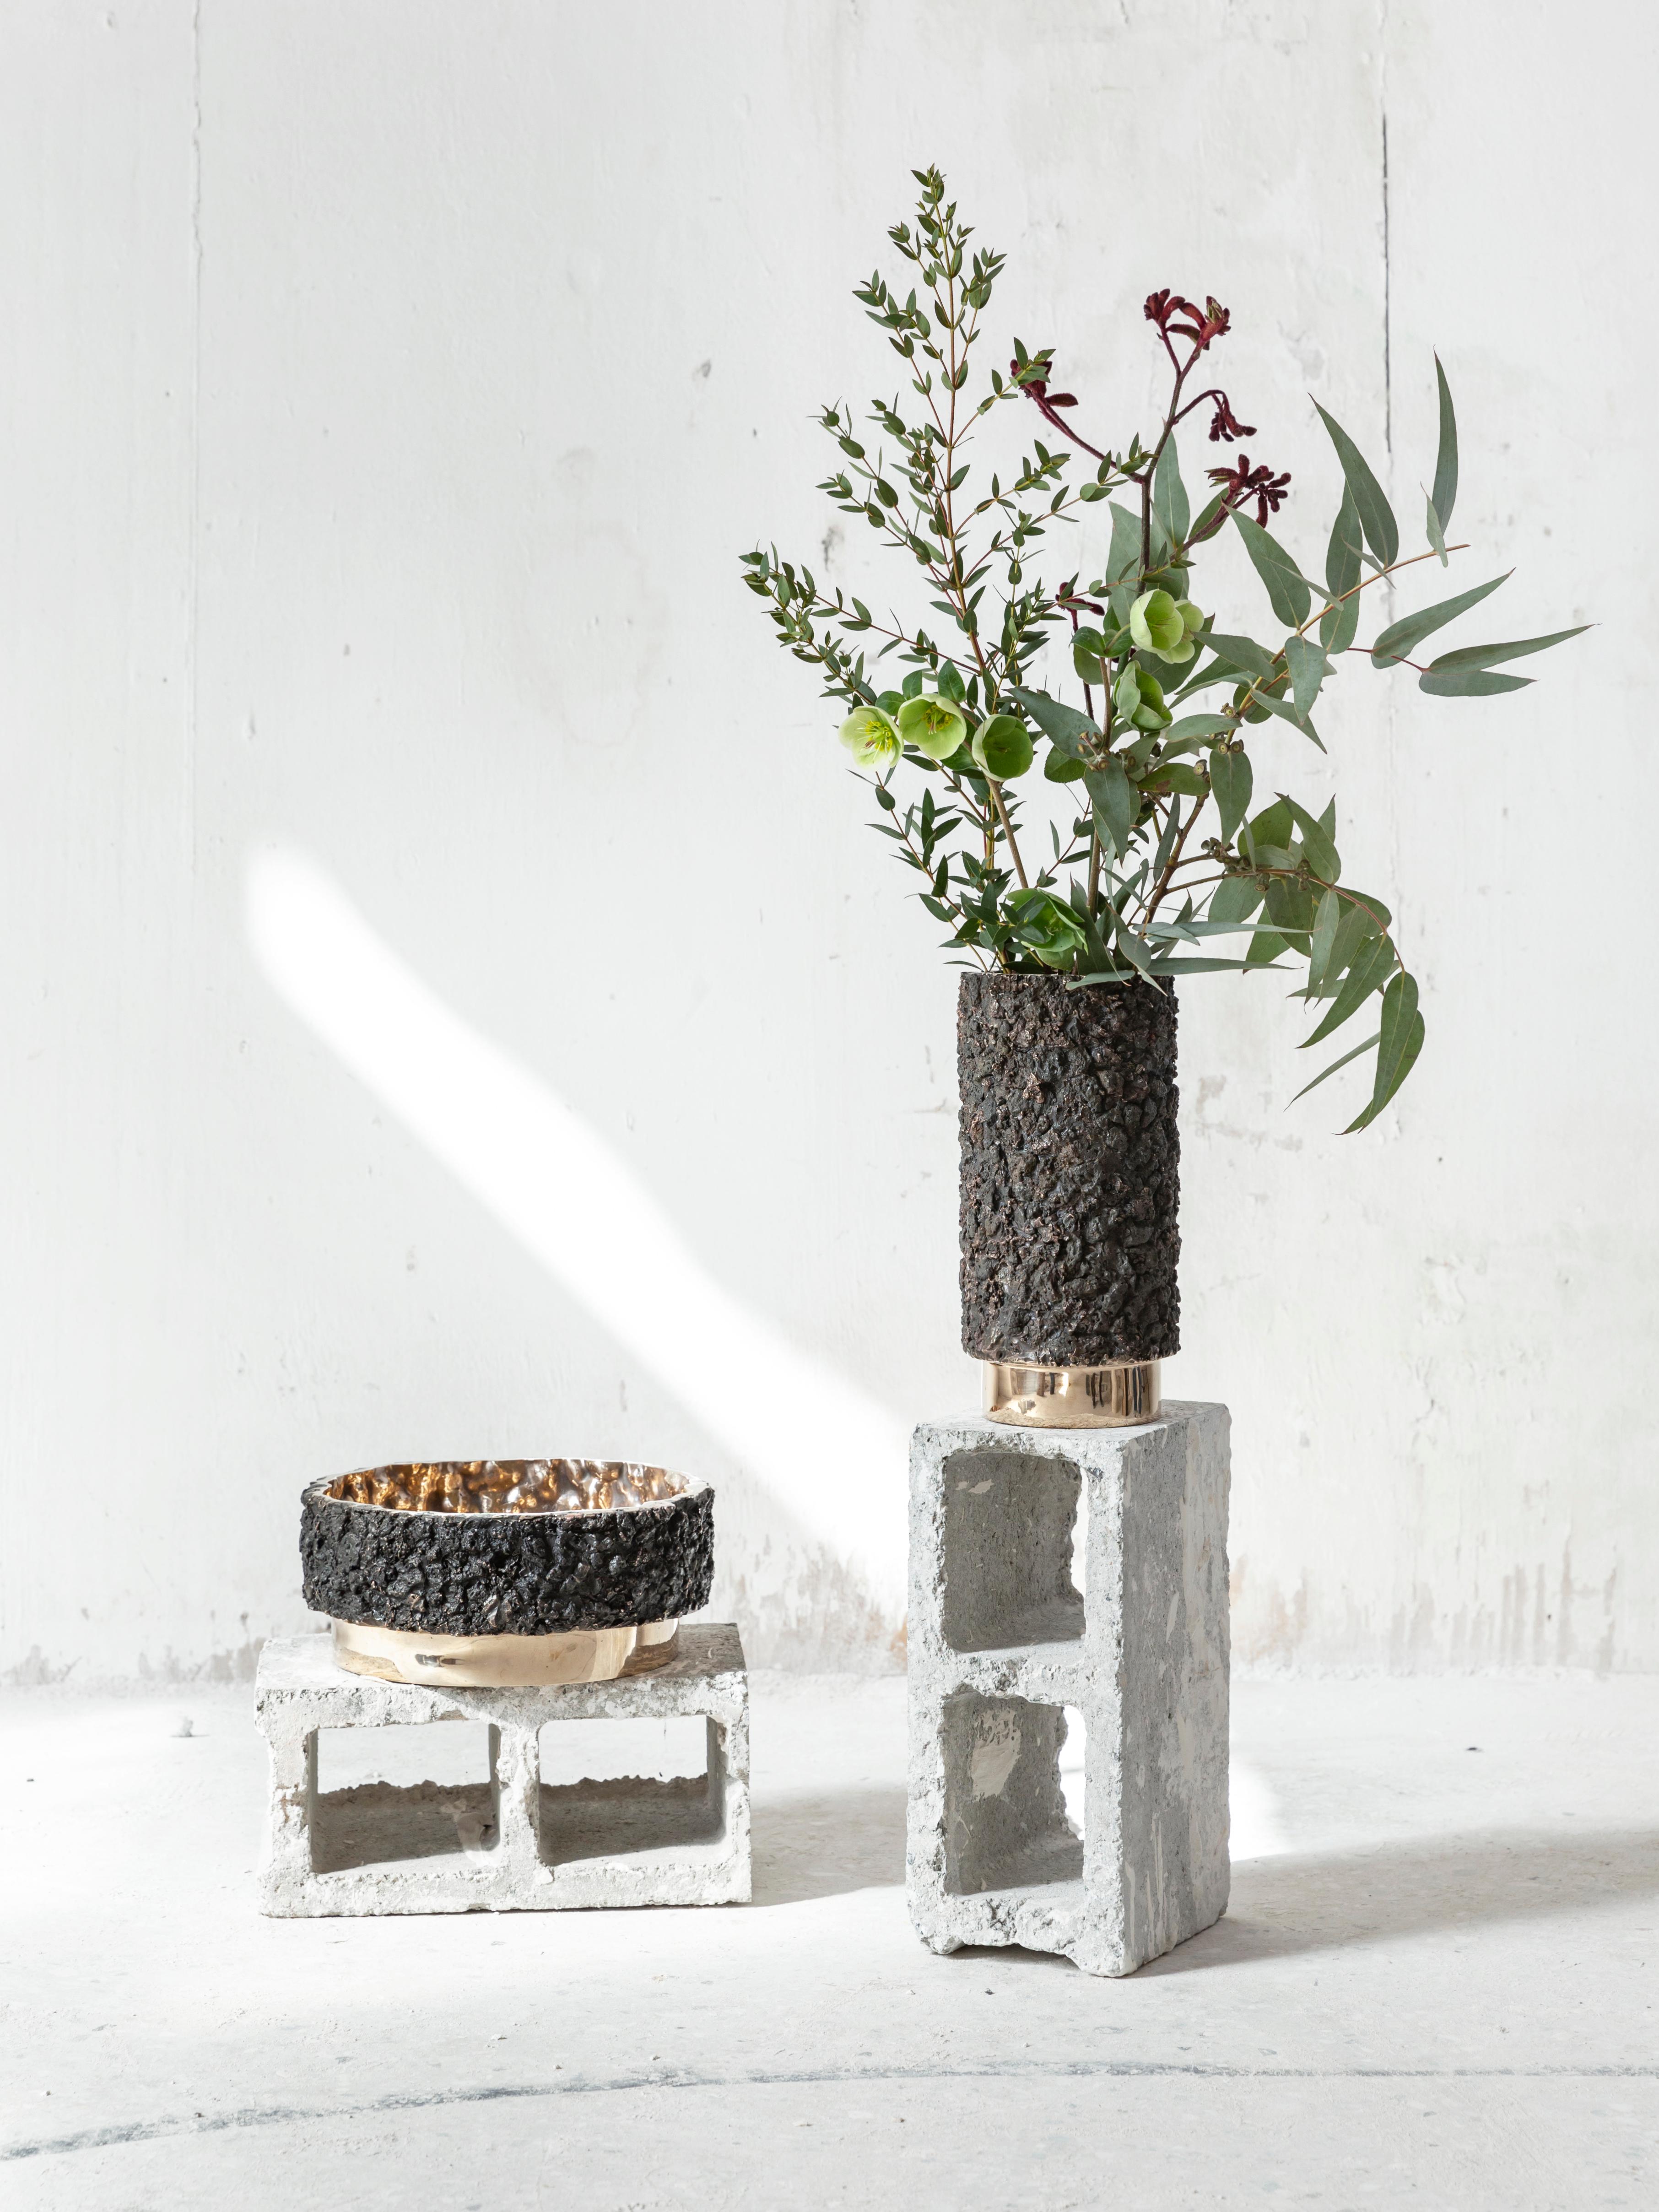 Bronze high vase by Tipstudio
Numbered Edition
Dimensions: Ø 15 x 30 cm
Materials: Slags, Statuario Bronze
Weight: 10 kg 

Tipstudio, Imma Matera and Tommaso Lucarini, has chosen to focus on metals byproduct aims to enhancing them by